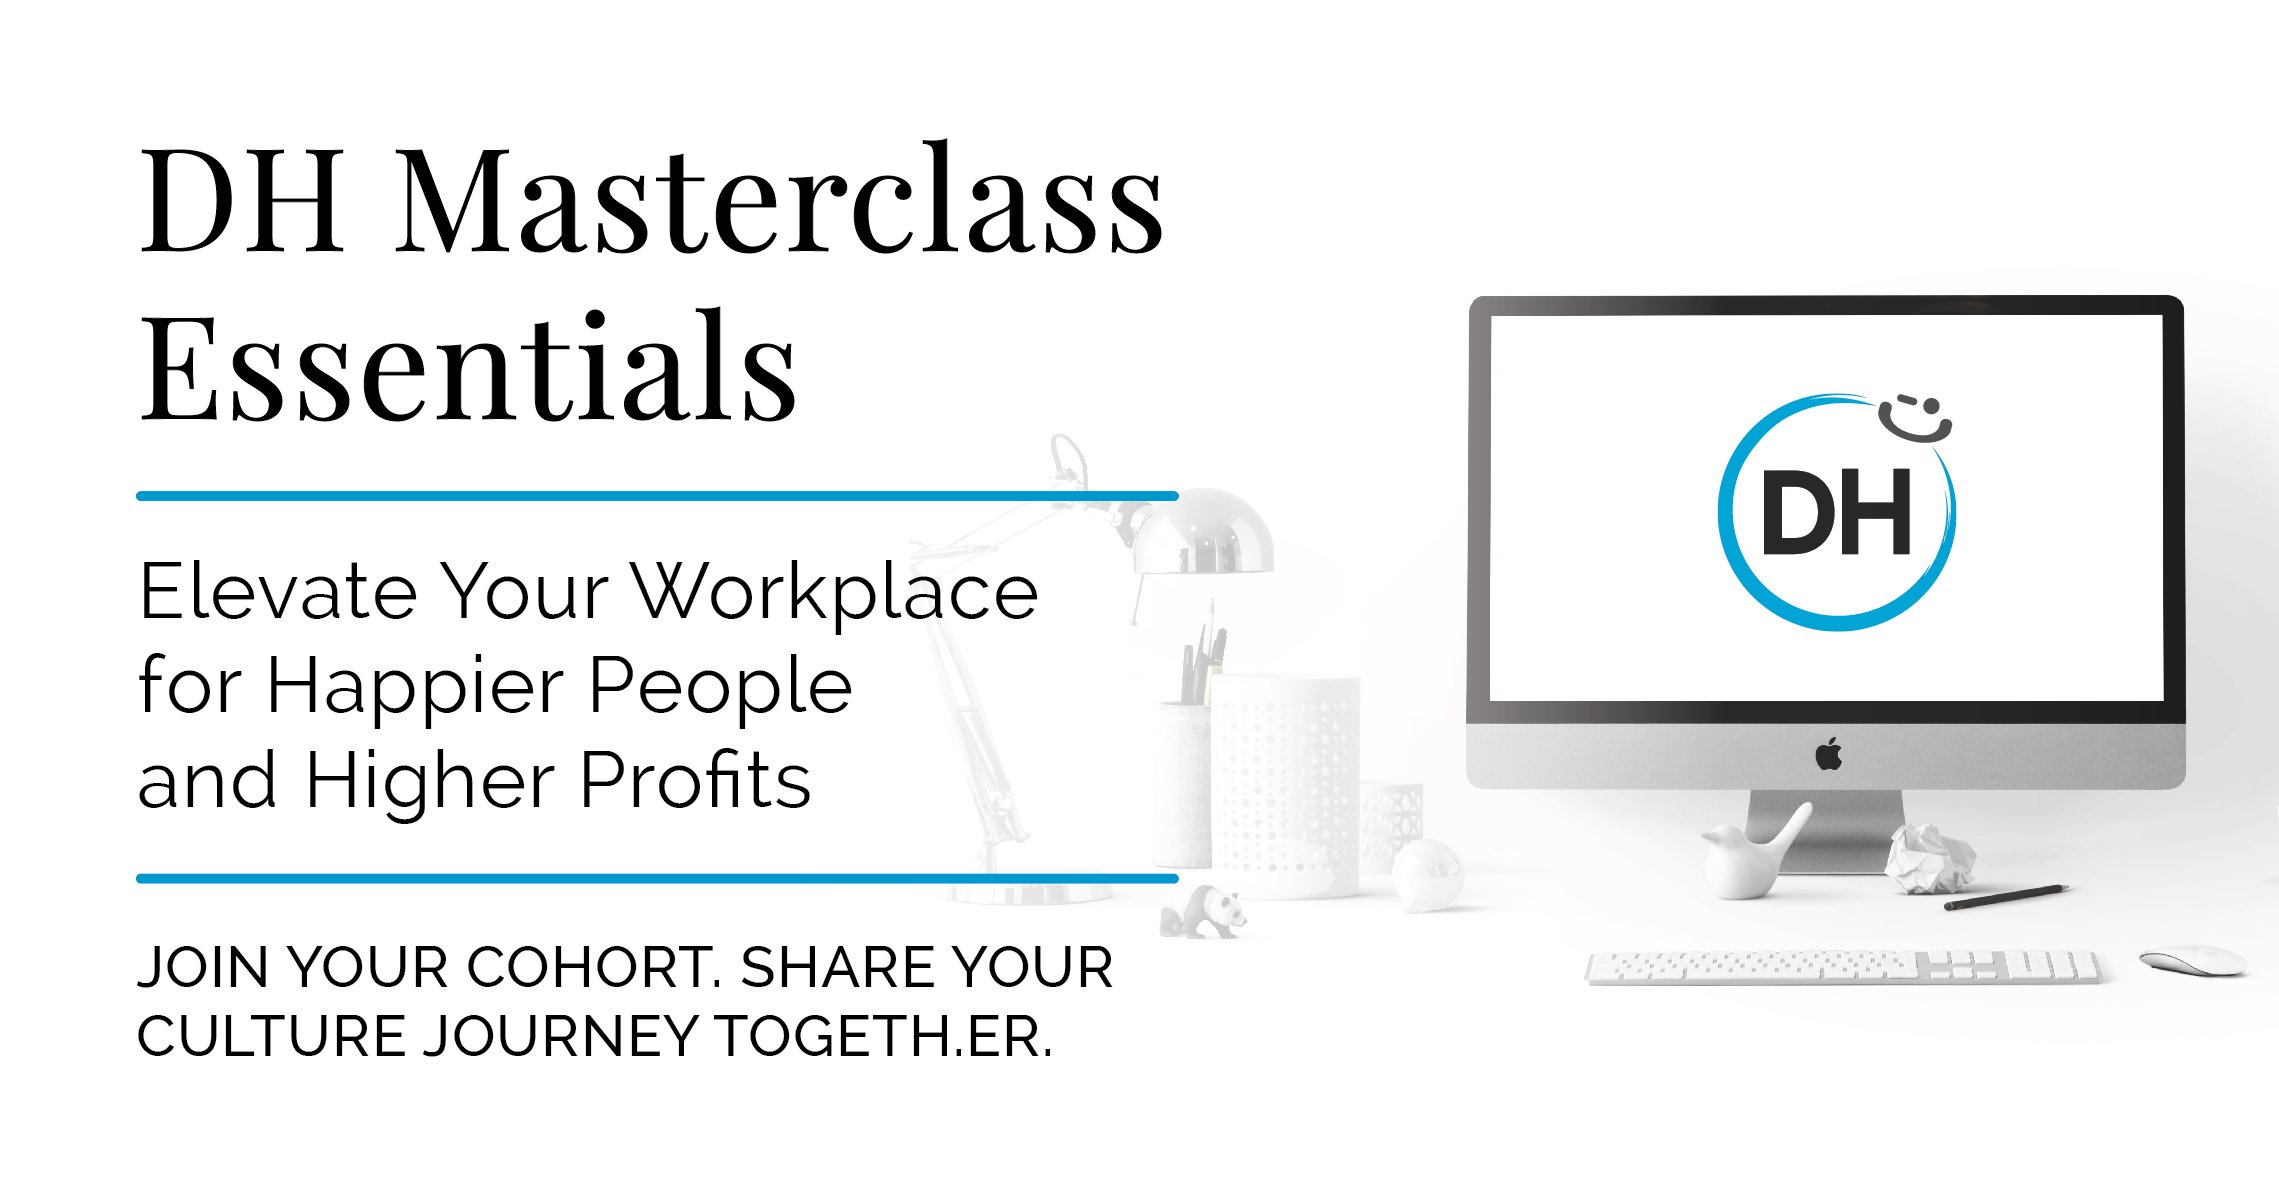 DH Masterclass Essentials - online course helping professionals prioritize culture